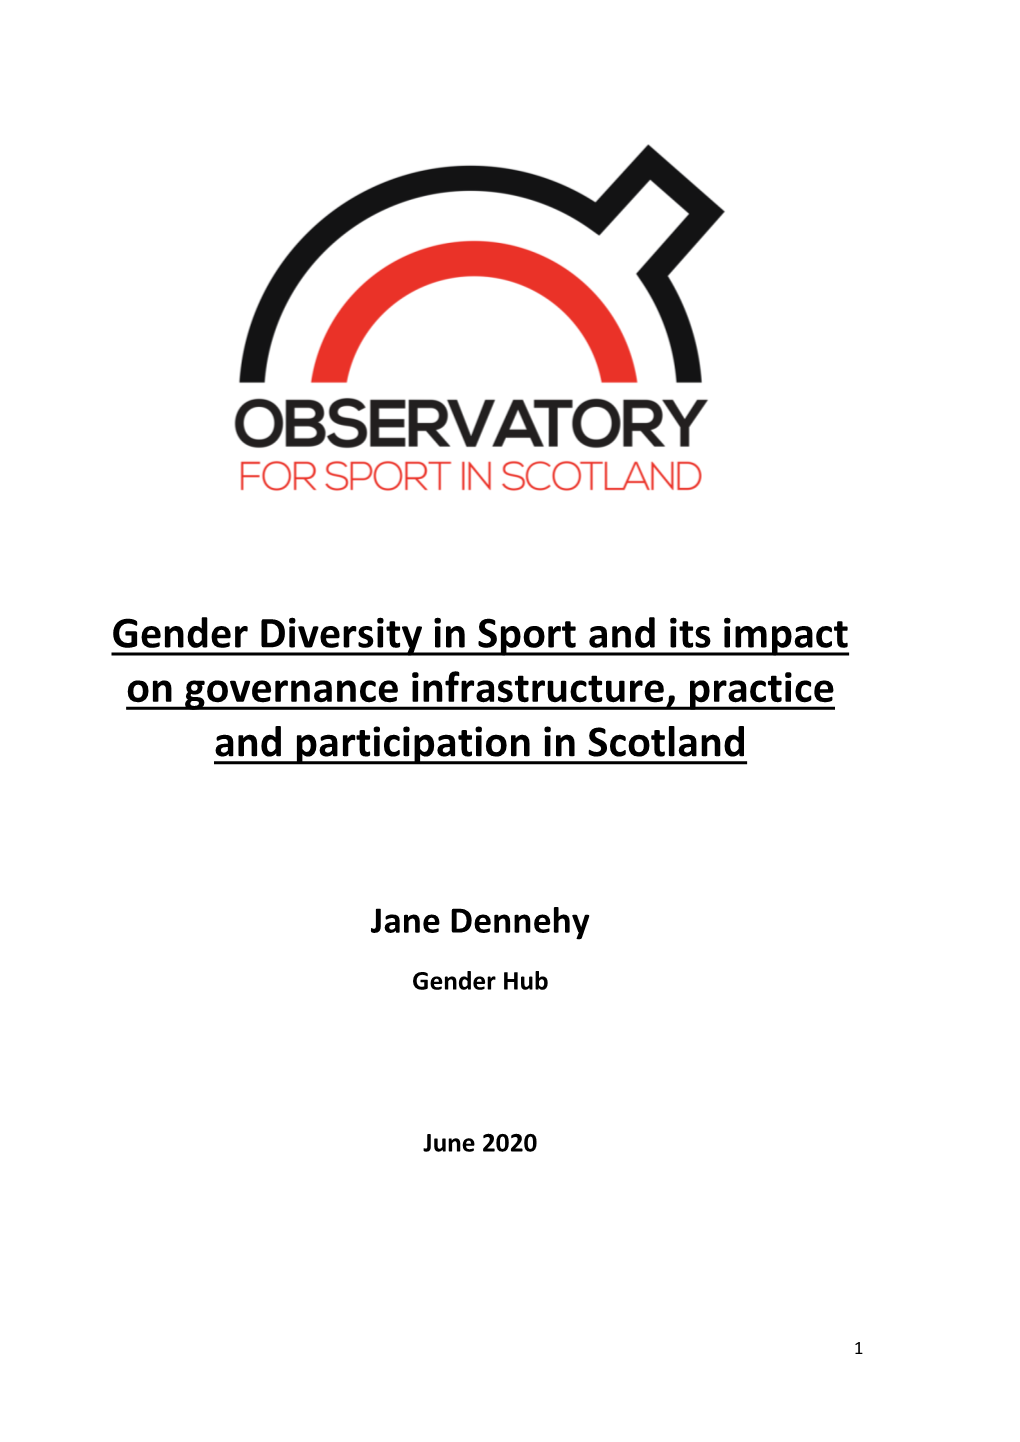 Gender Diversity in Sport and Its Impact on Governance Infrastructure, Practice and Participation in Scotland